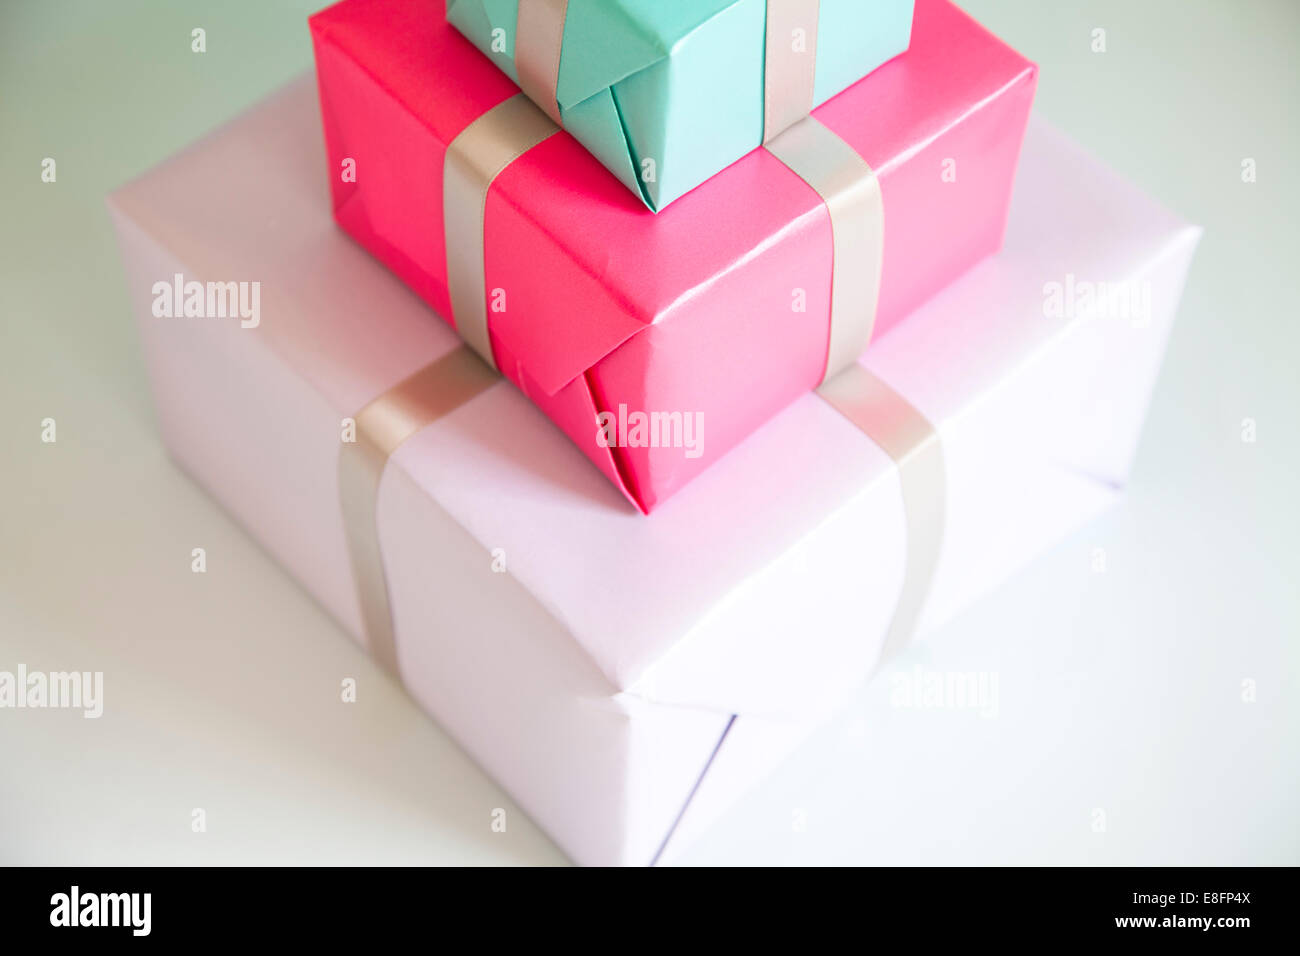 Close-up of a stack of Three wrapped gifts Stock Photo